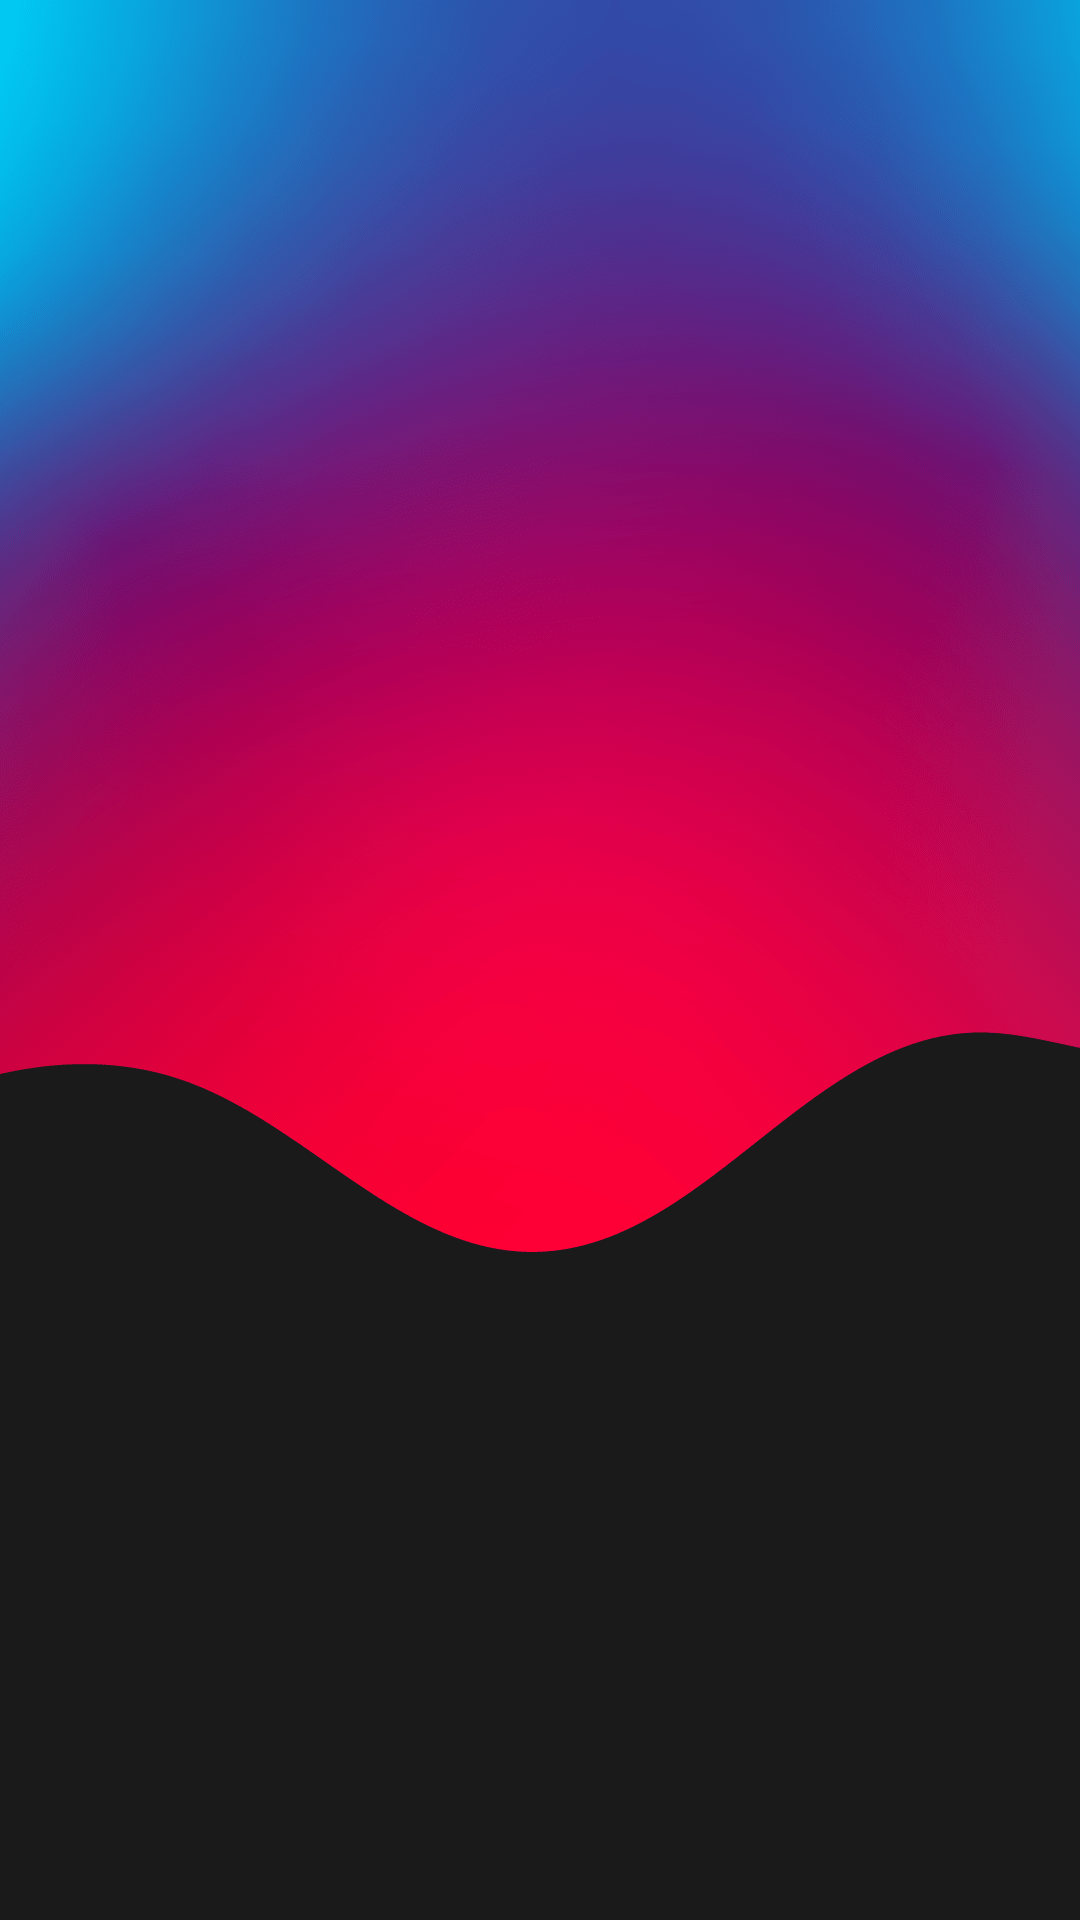 Simple clean background wallpaper iphone 4k